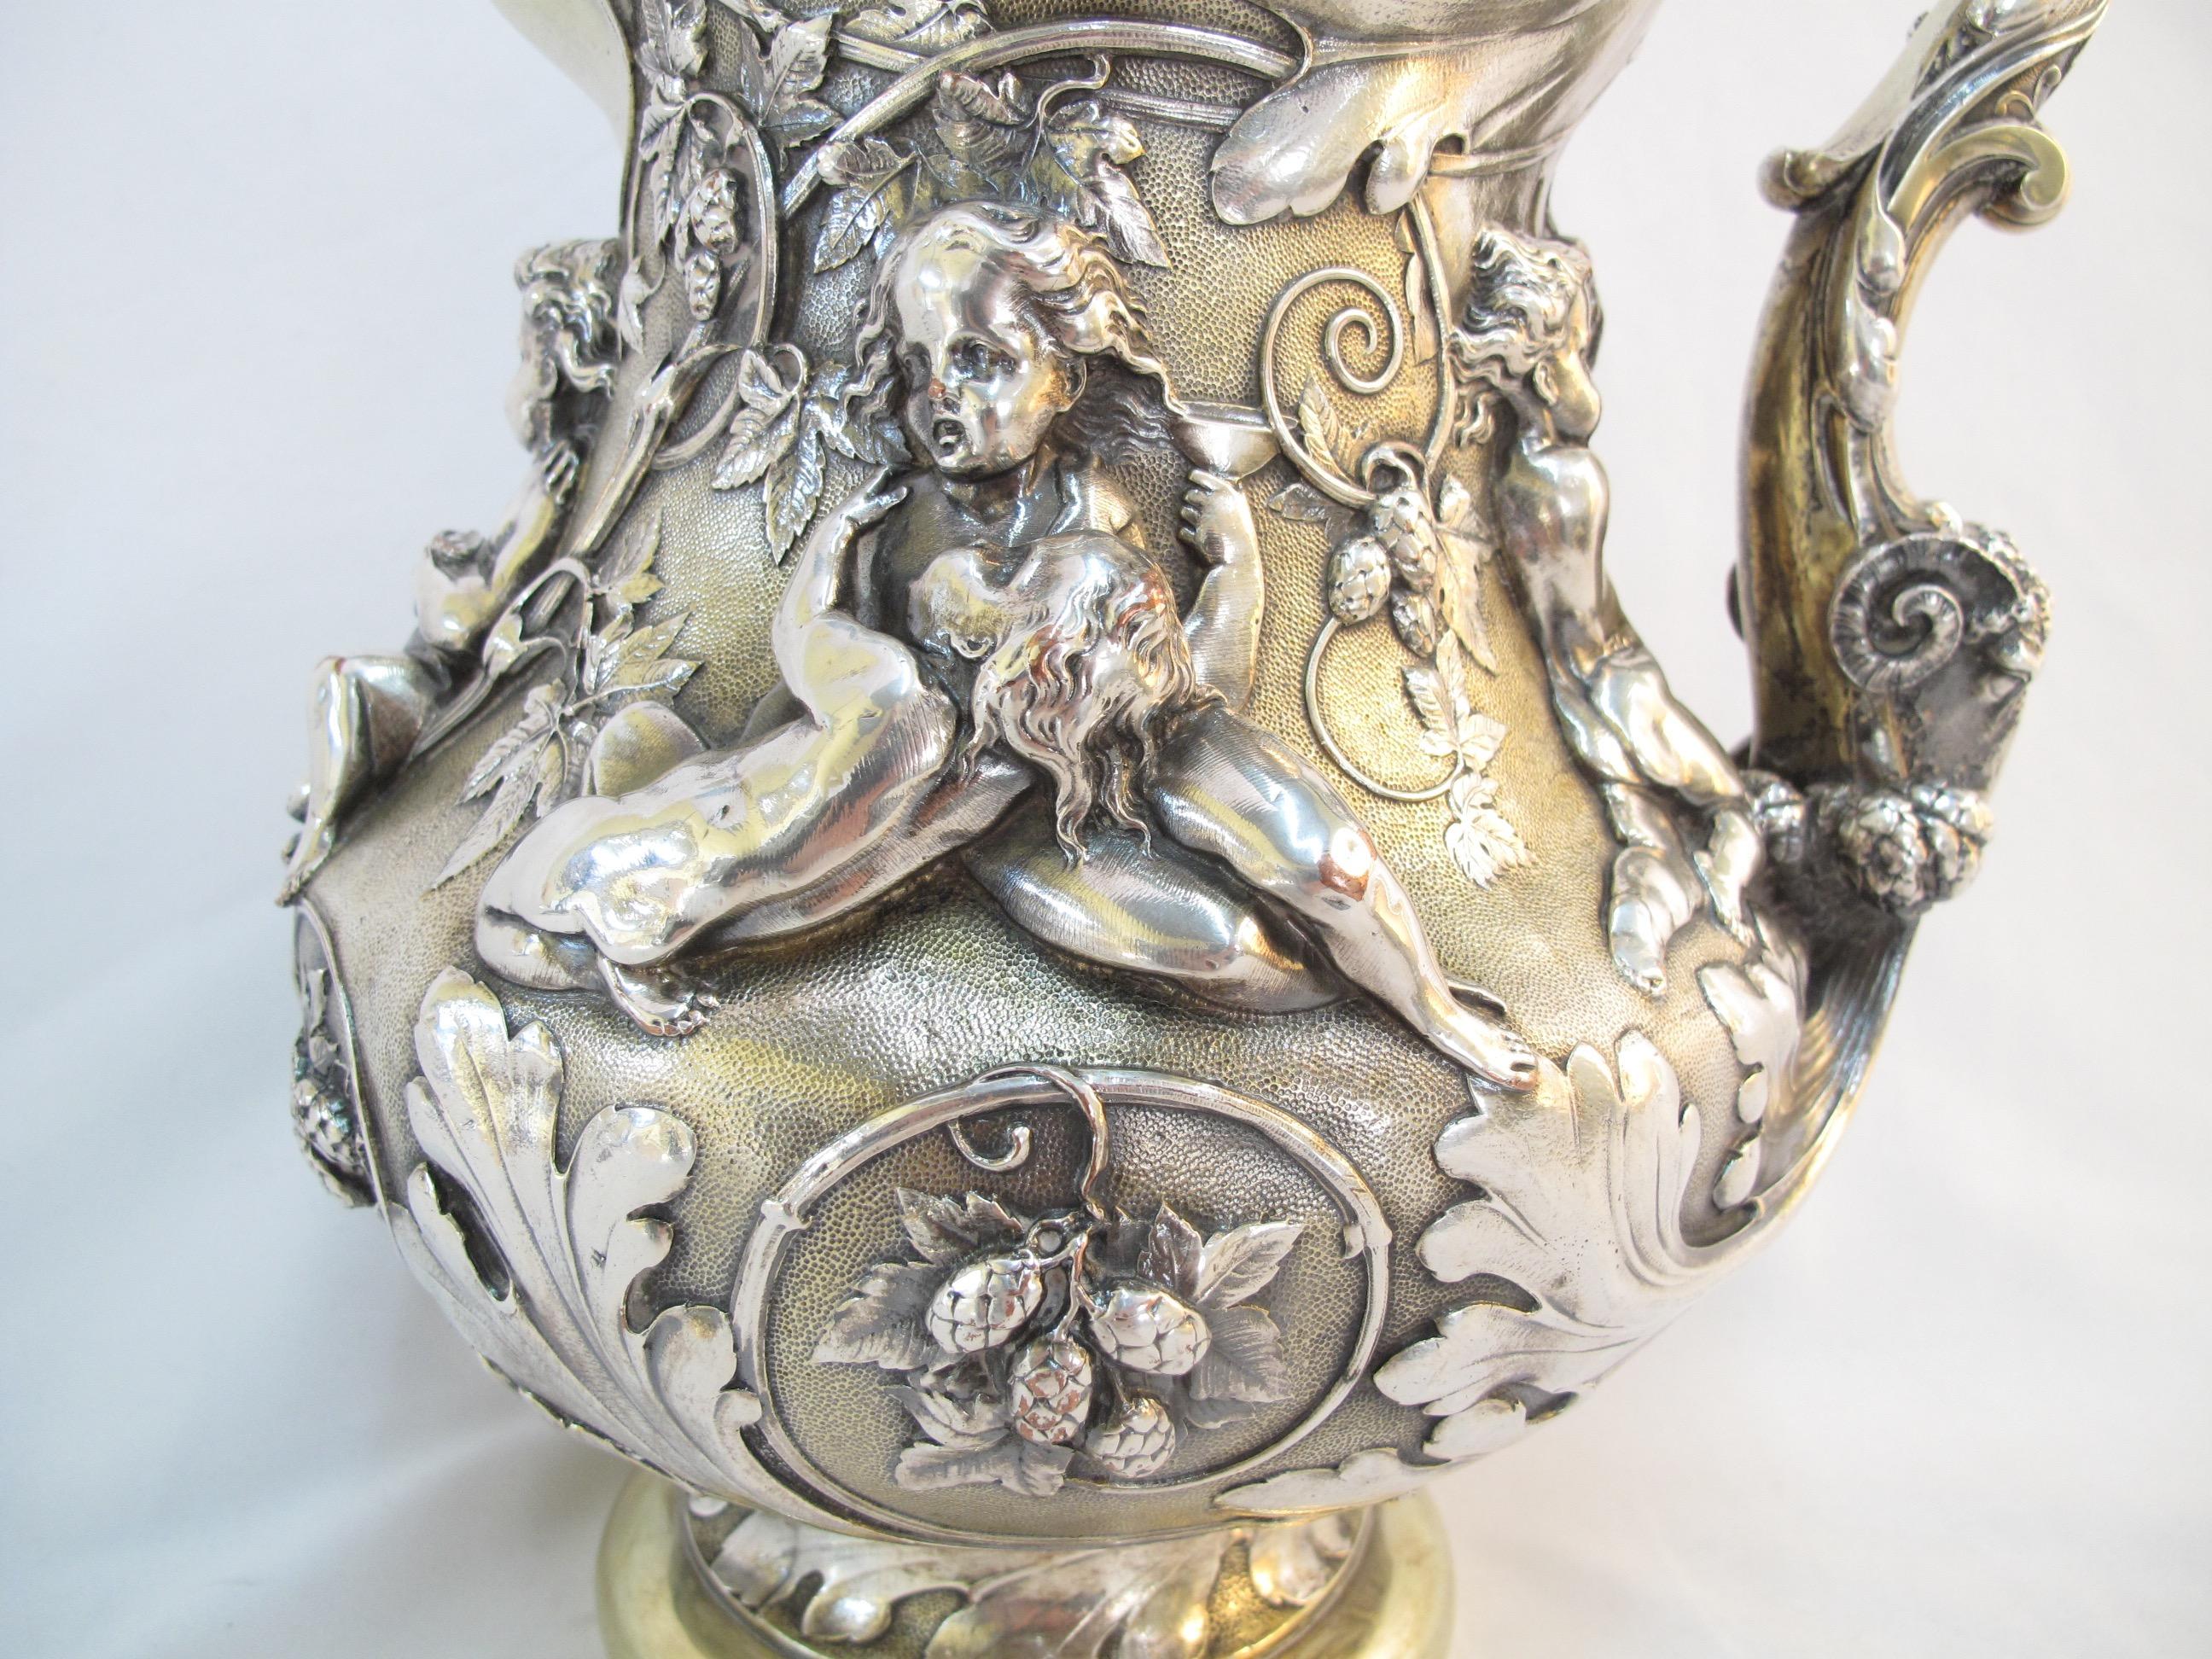 Large Ornate Putti Cavorting Among Hops Repousse Pitcher Elkington 19th Century In Good Condition For Sale In Portland, OR